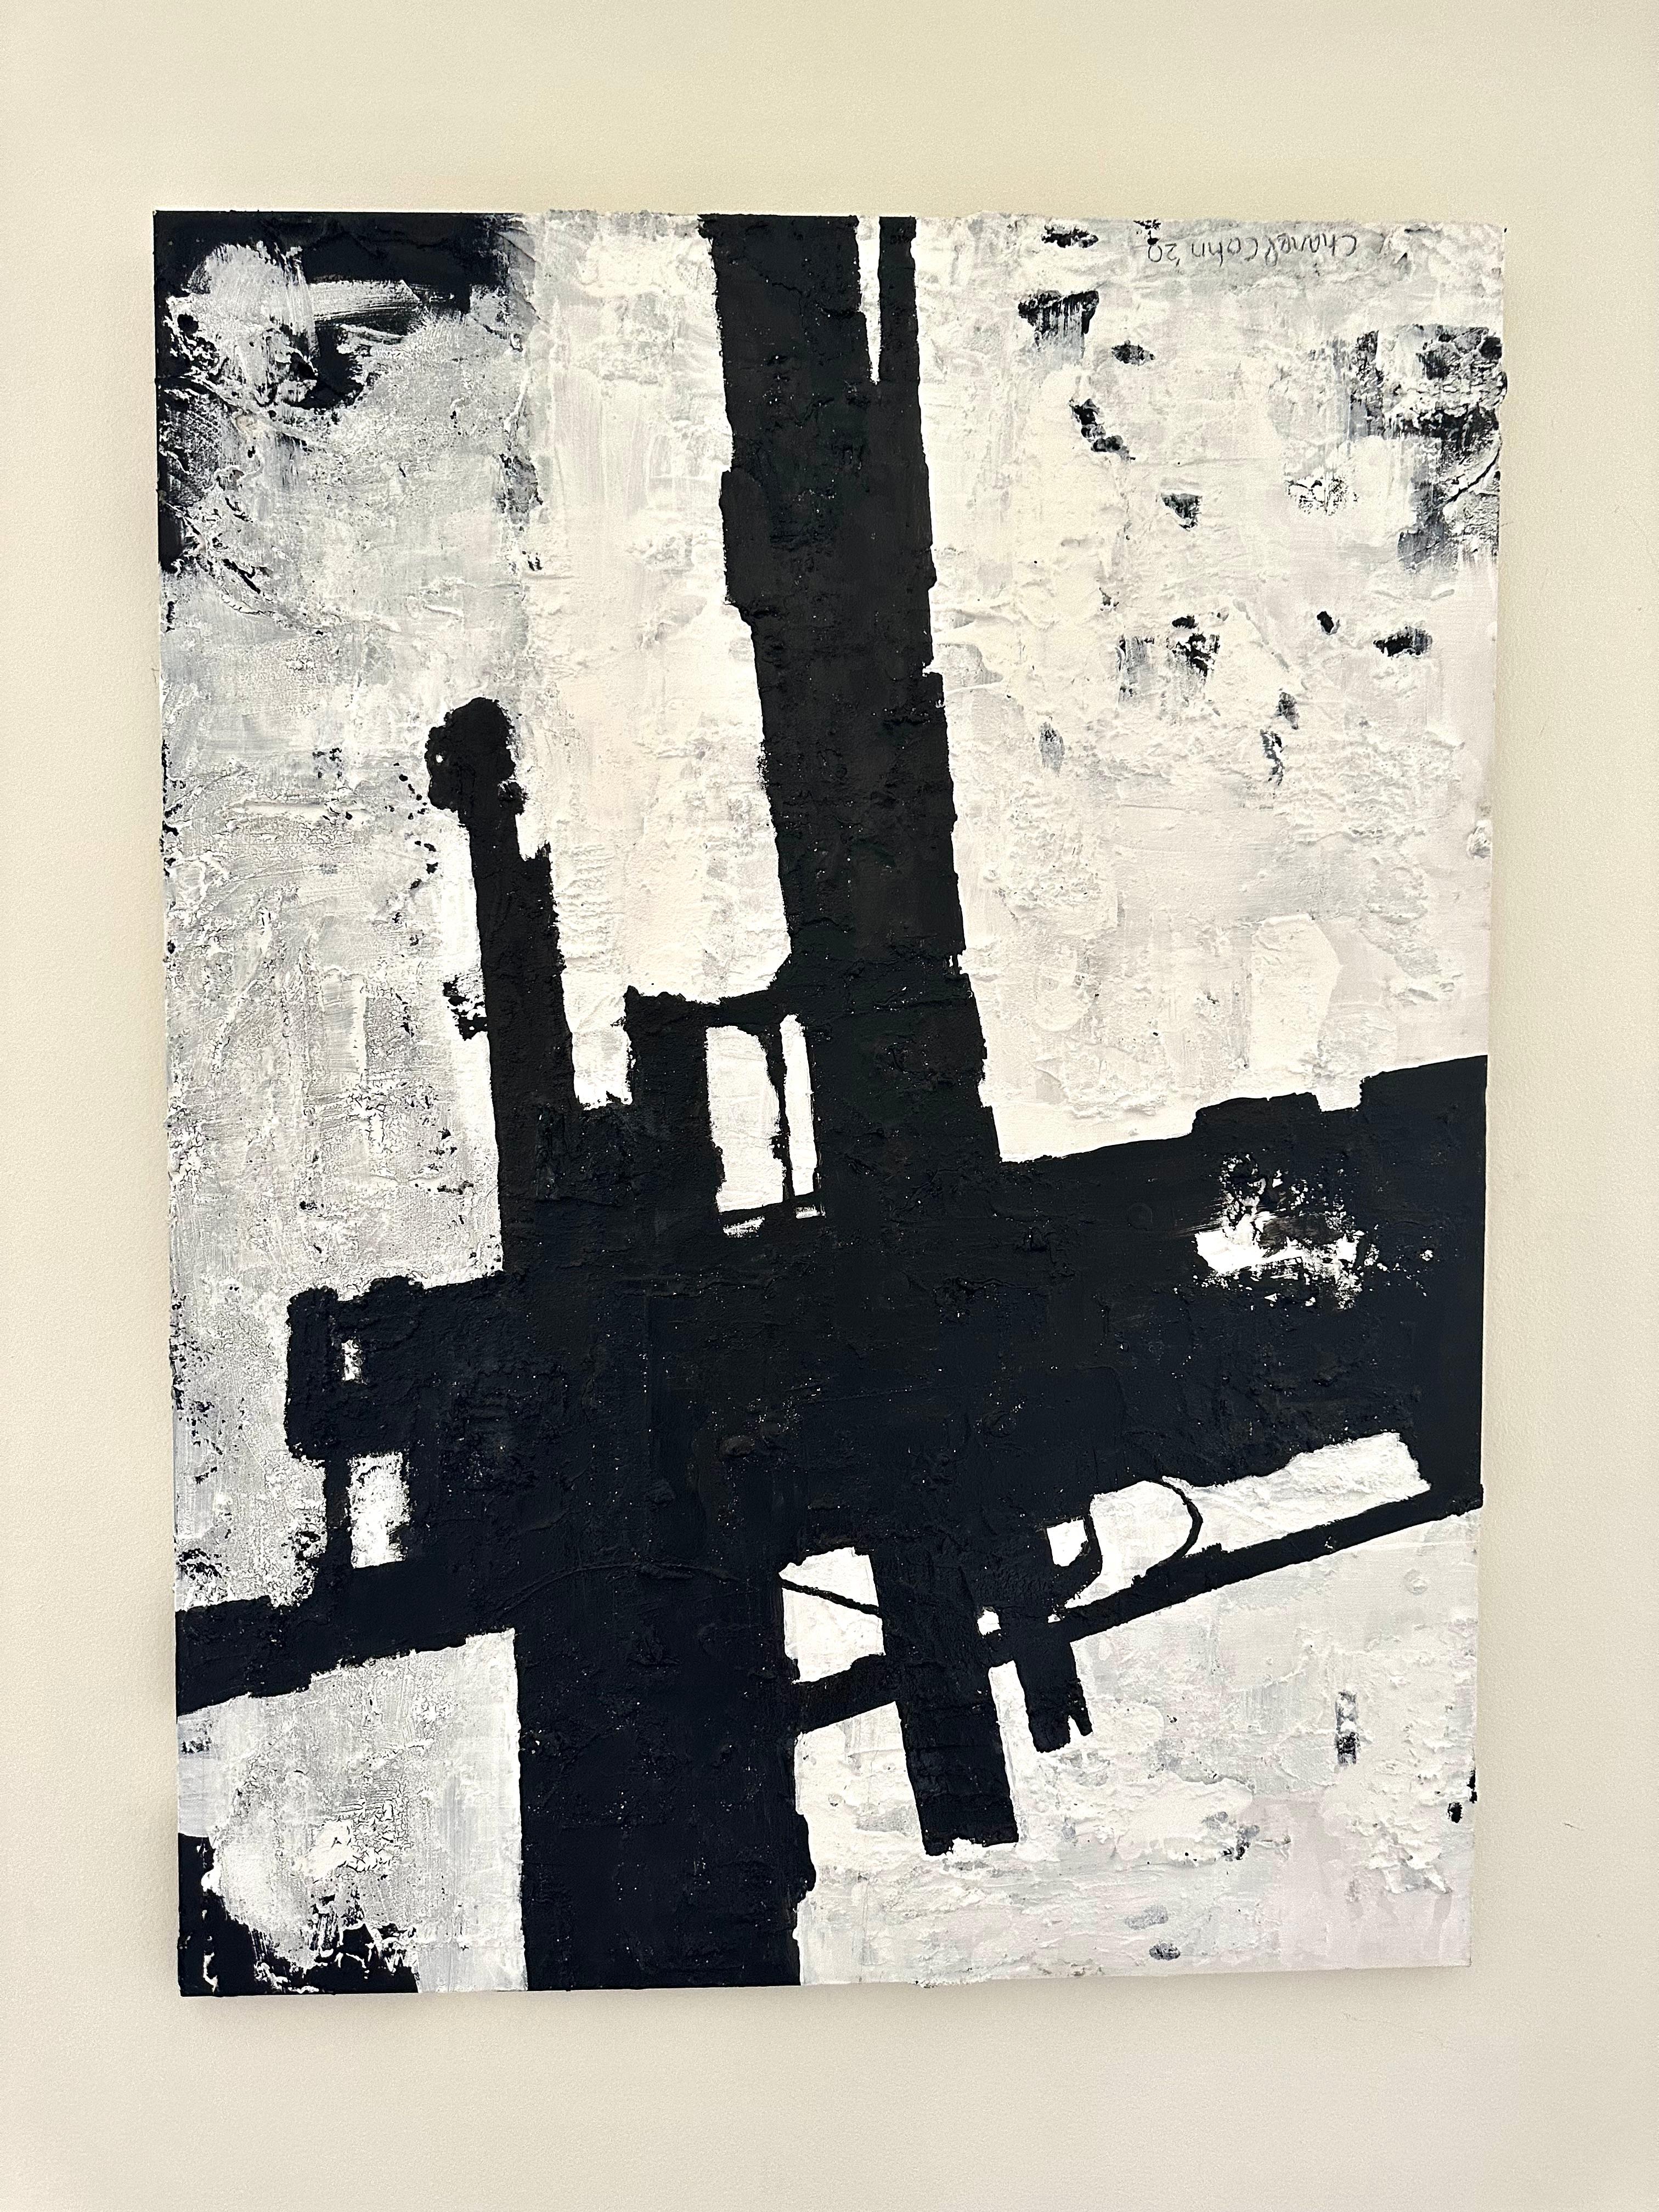 Chanel Cohn - Empire State of Mind, 40x30, Mixed Media, Concrete, Gesso and  Acrylic on Canvas For Sale at 1stDibs